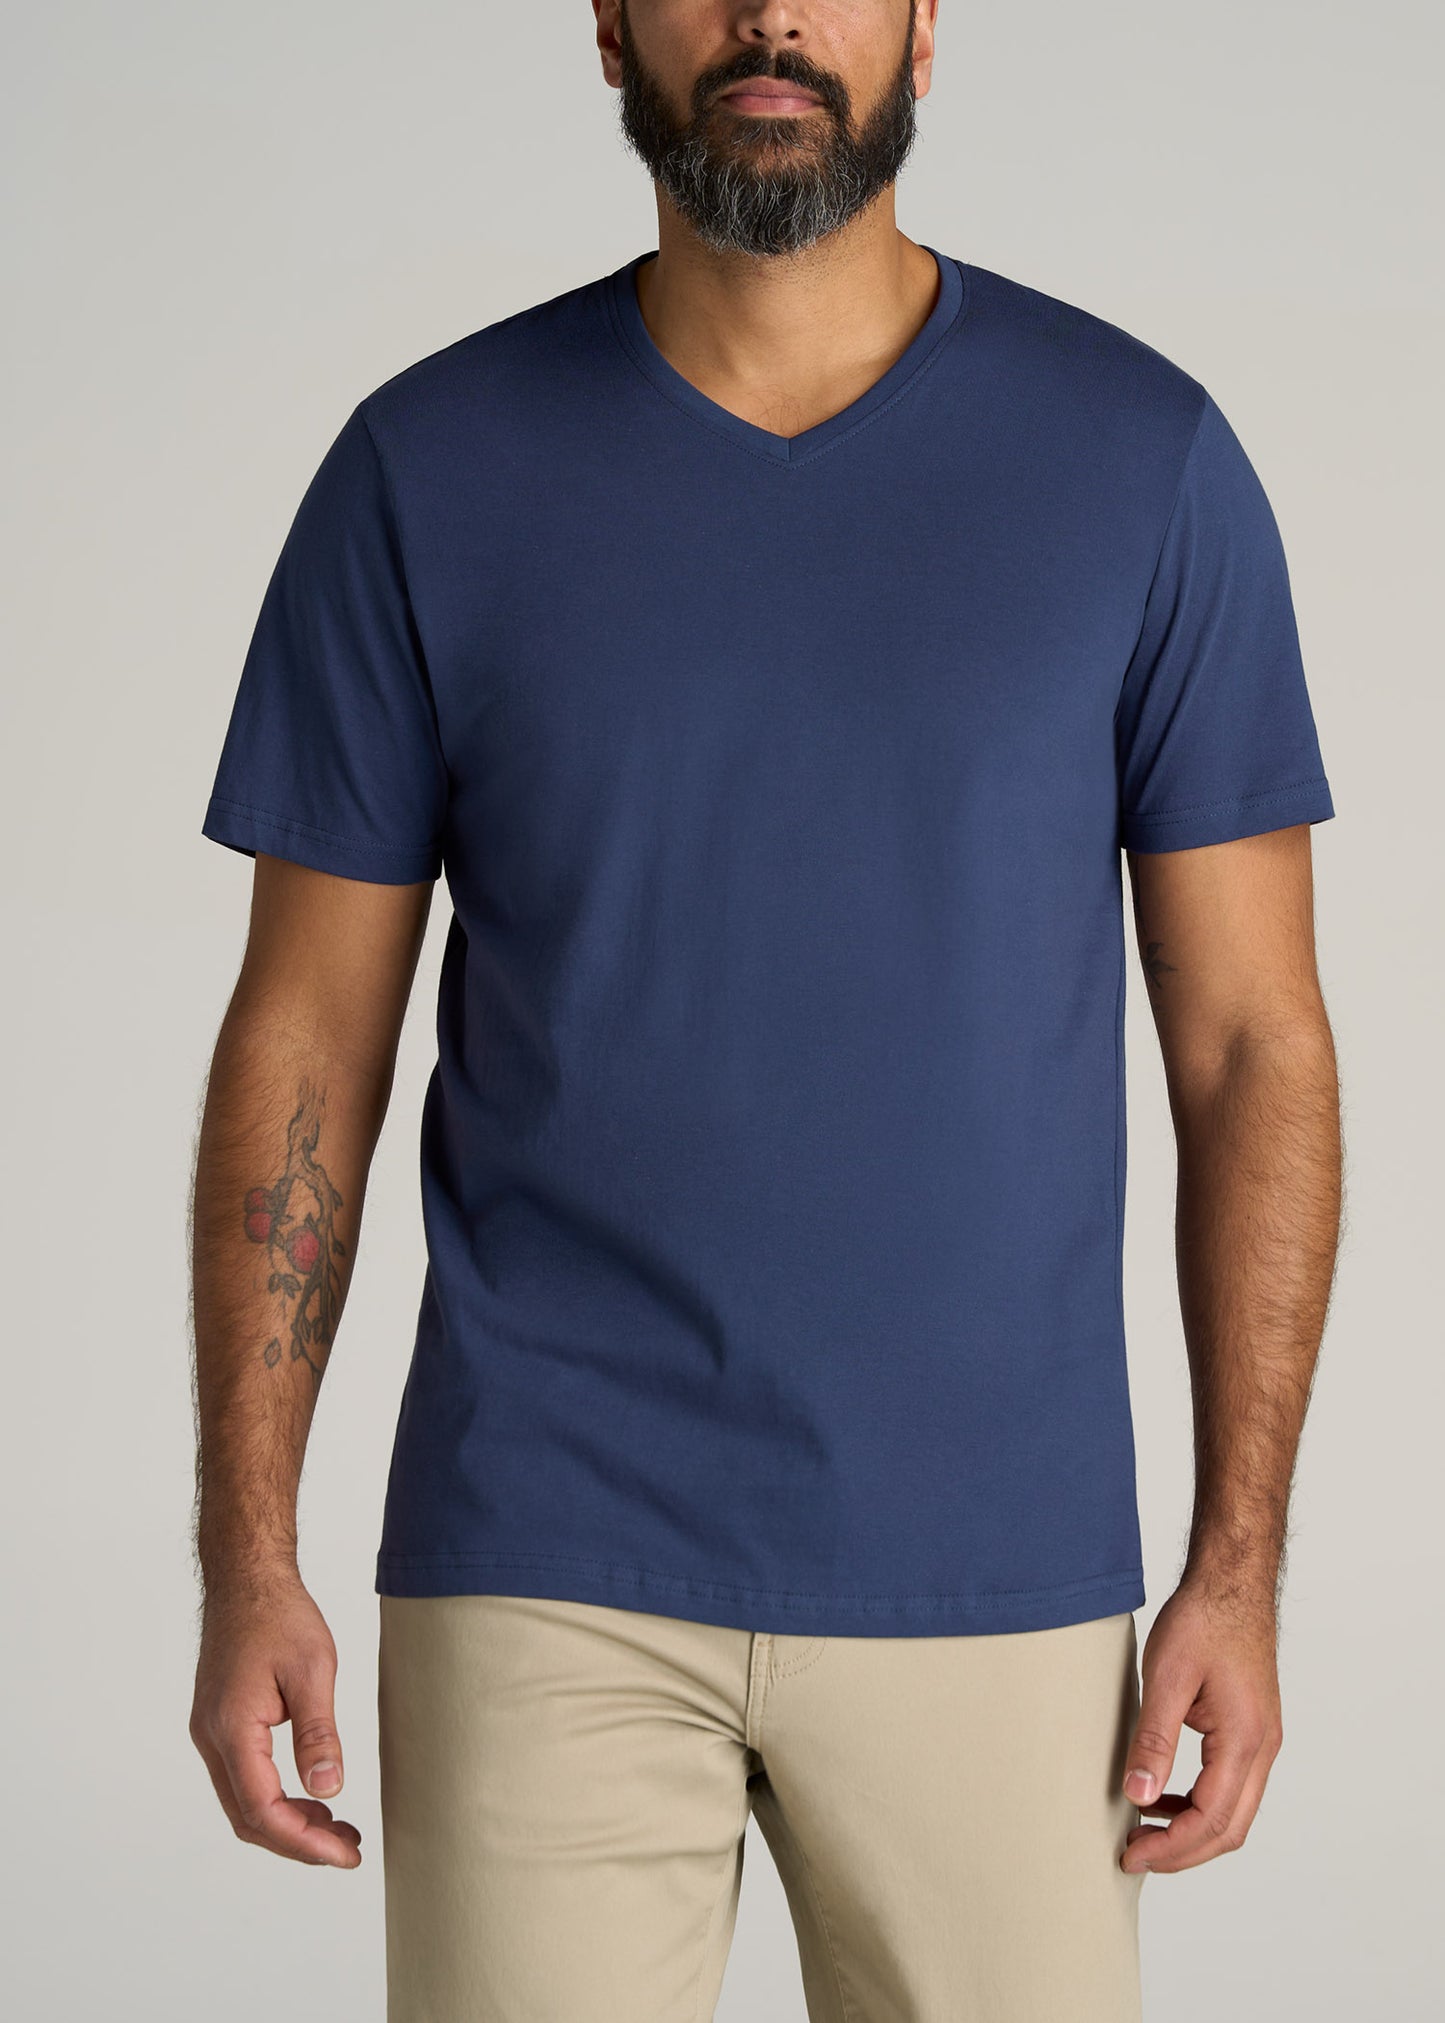 Tall Drink Like A Fish Short Sleeve Tee | 3xlt | Washed Navy (WASNV)